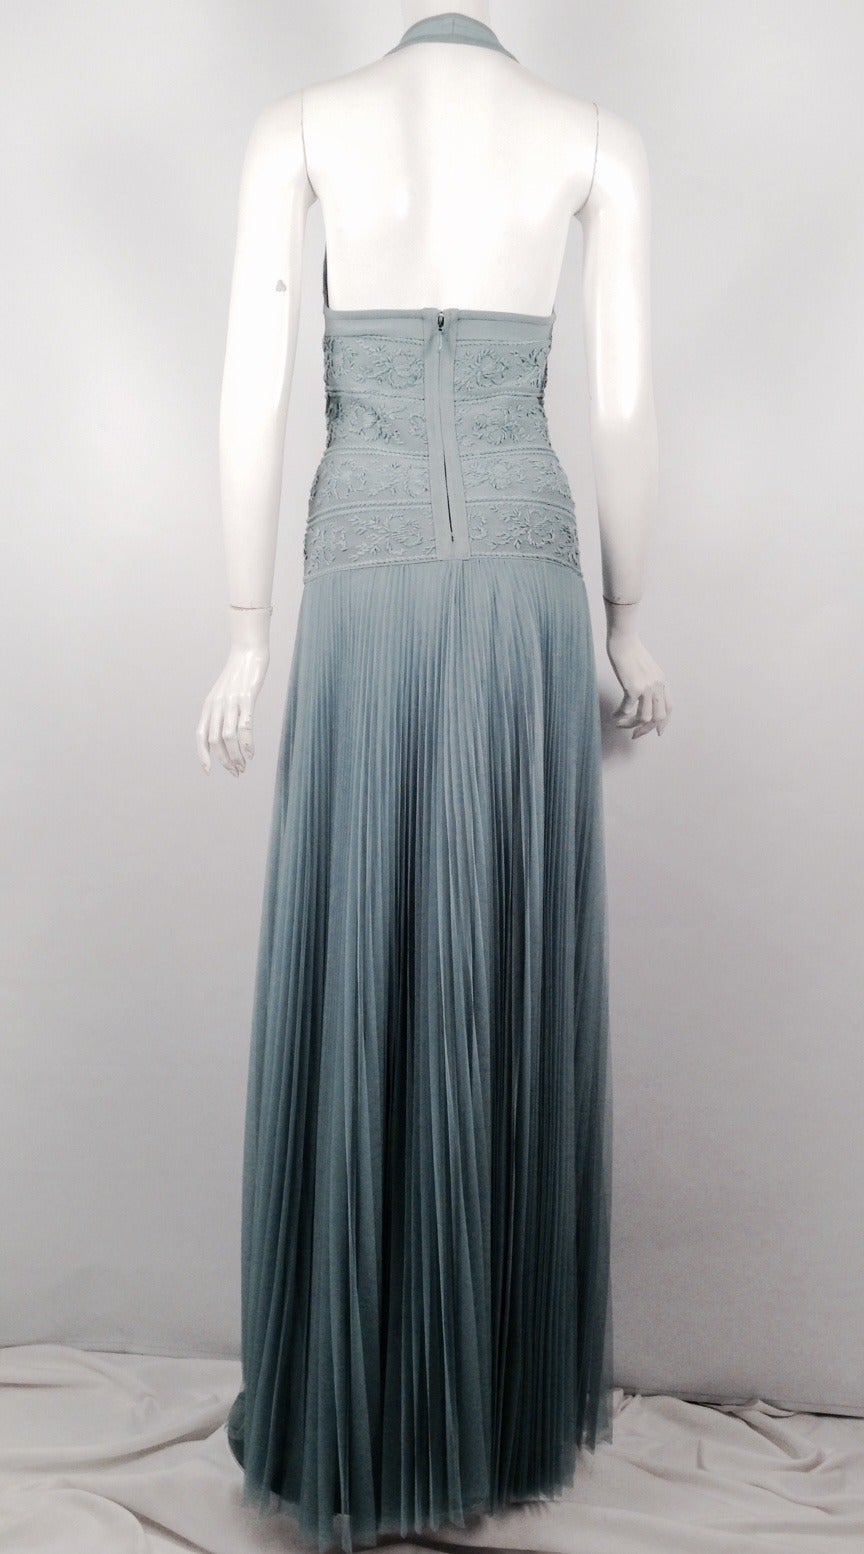 Gown with embroidered bodice and full skirt is an excellent example of Herve Leger's 